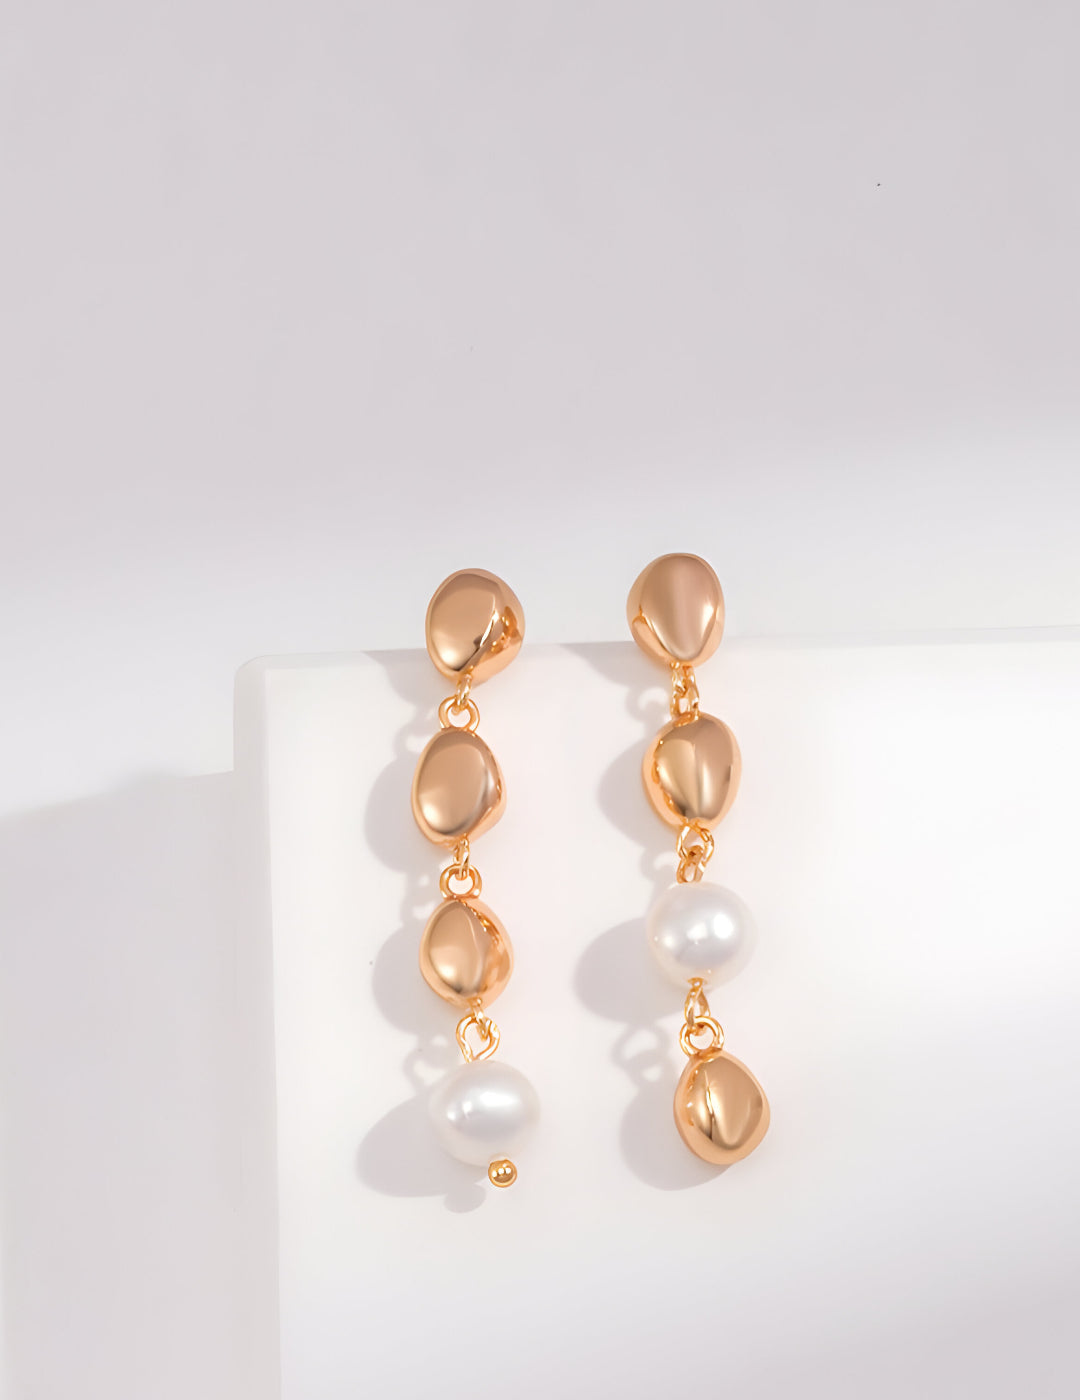 A symbol of interconnected beauty and harmonious rhythm elegance earrings - S925 Sterling Silver with 18K Gold Vermeil- Pearl Luminance -  timeless design and impeccable craftsmanship